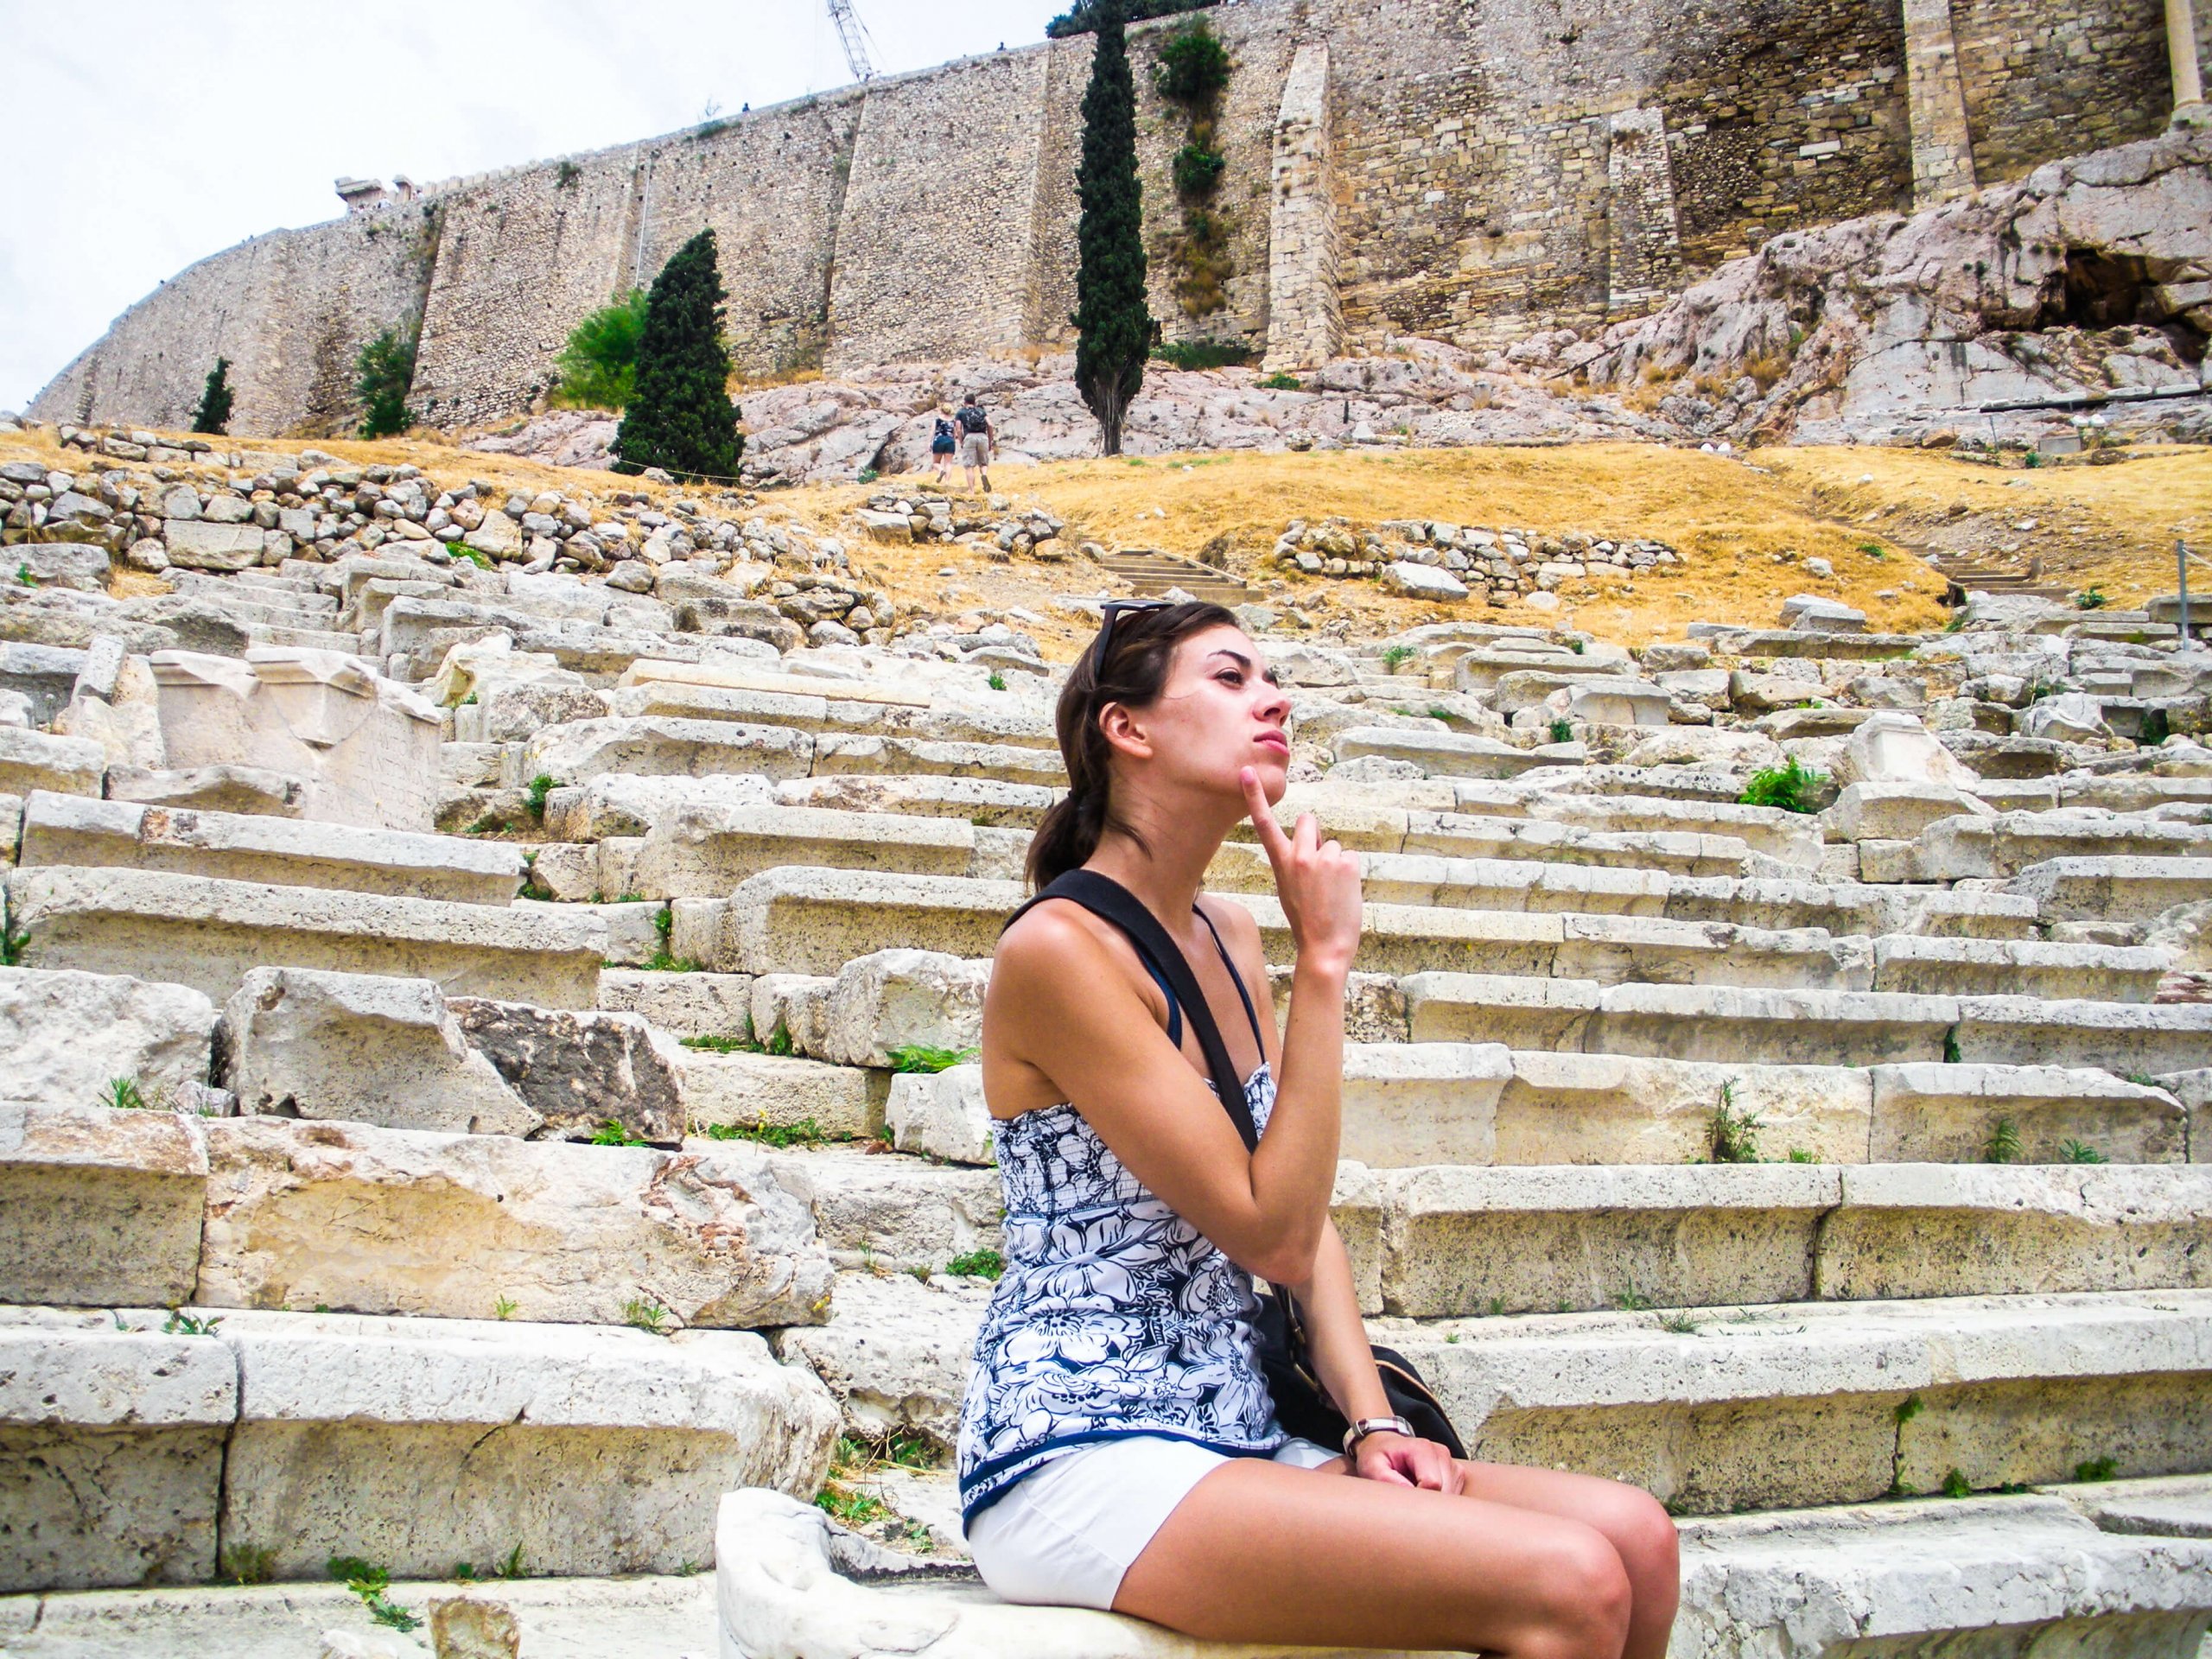 After trekking through Athens in the ancient footsteps of so many great and powerful thinkers, you may even find yourself a little wiser...pondering life on what's left of the seats of the old Acropolis theater.